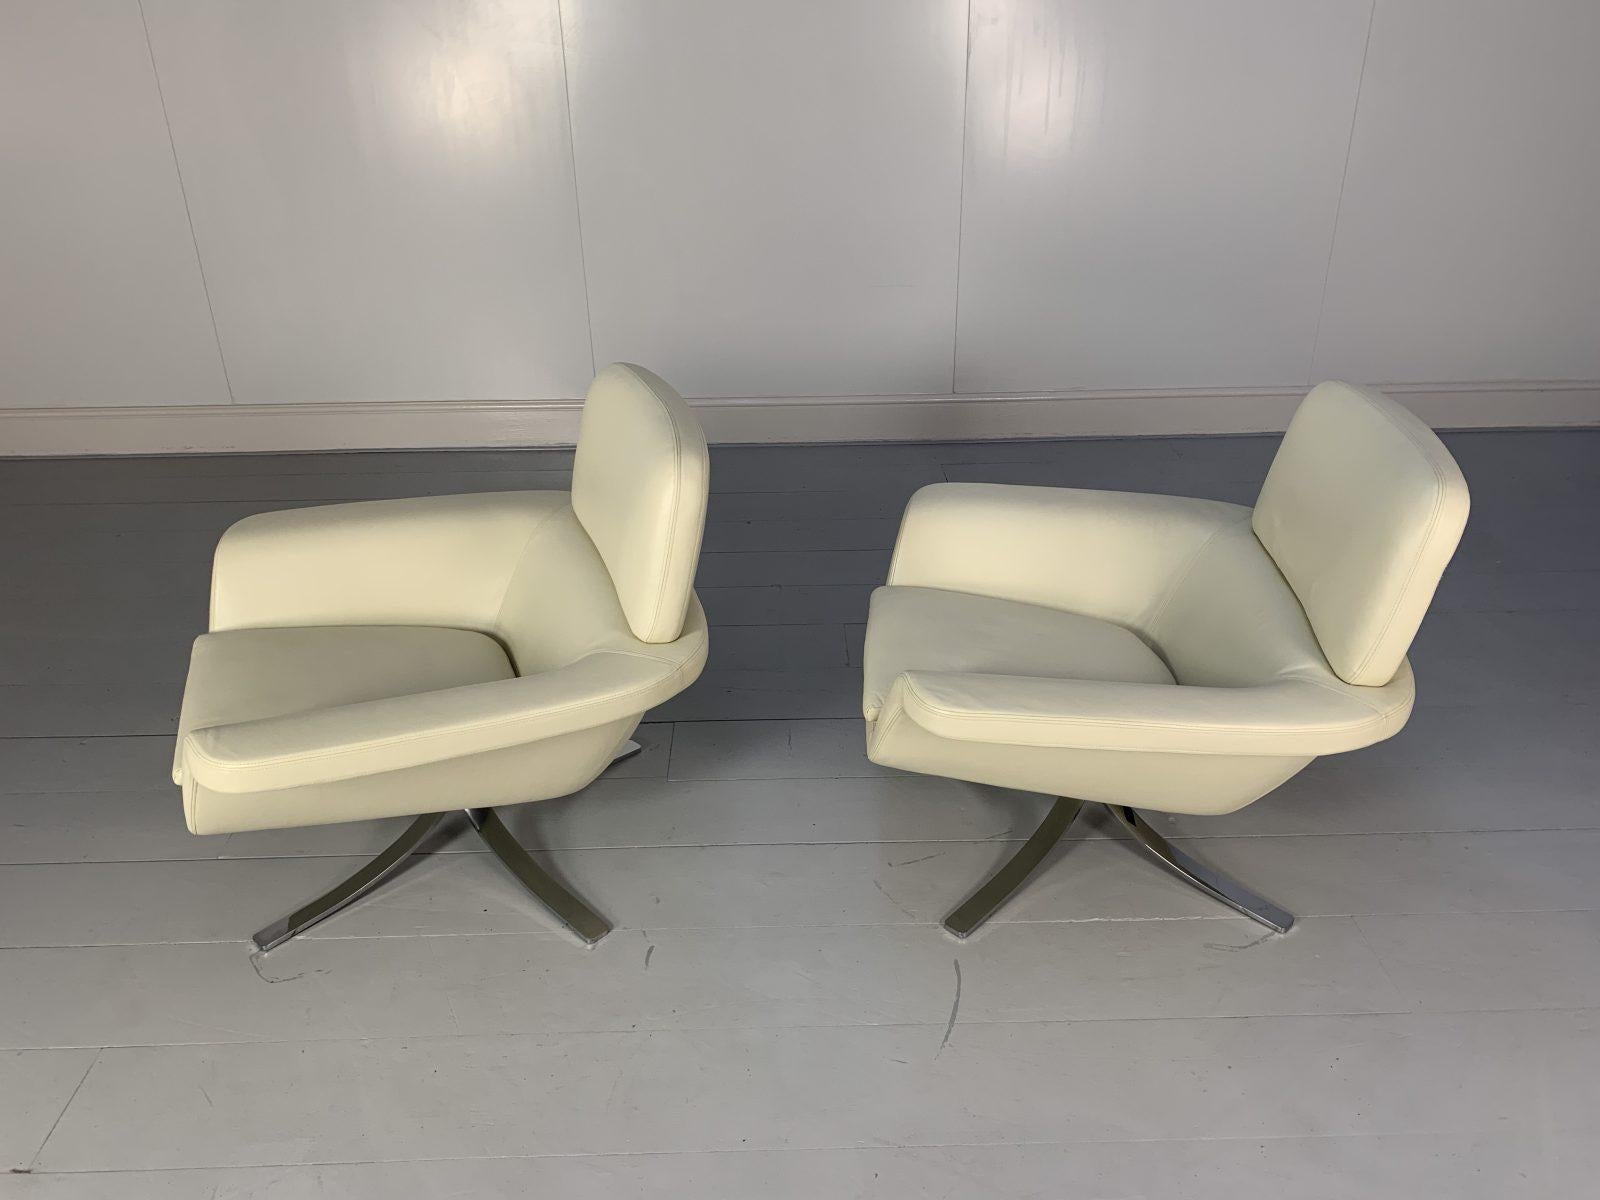 Minotti “Blake Soft” Armchairs, in Ivory Leather 2